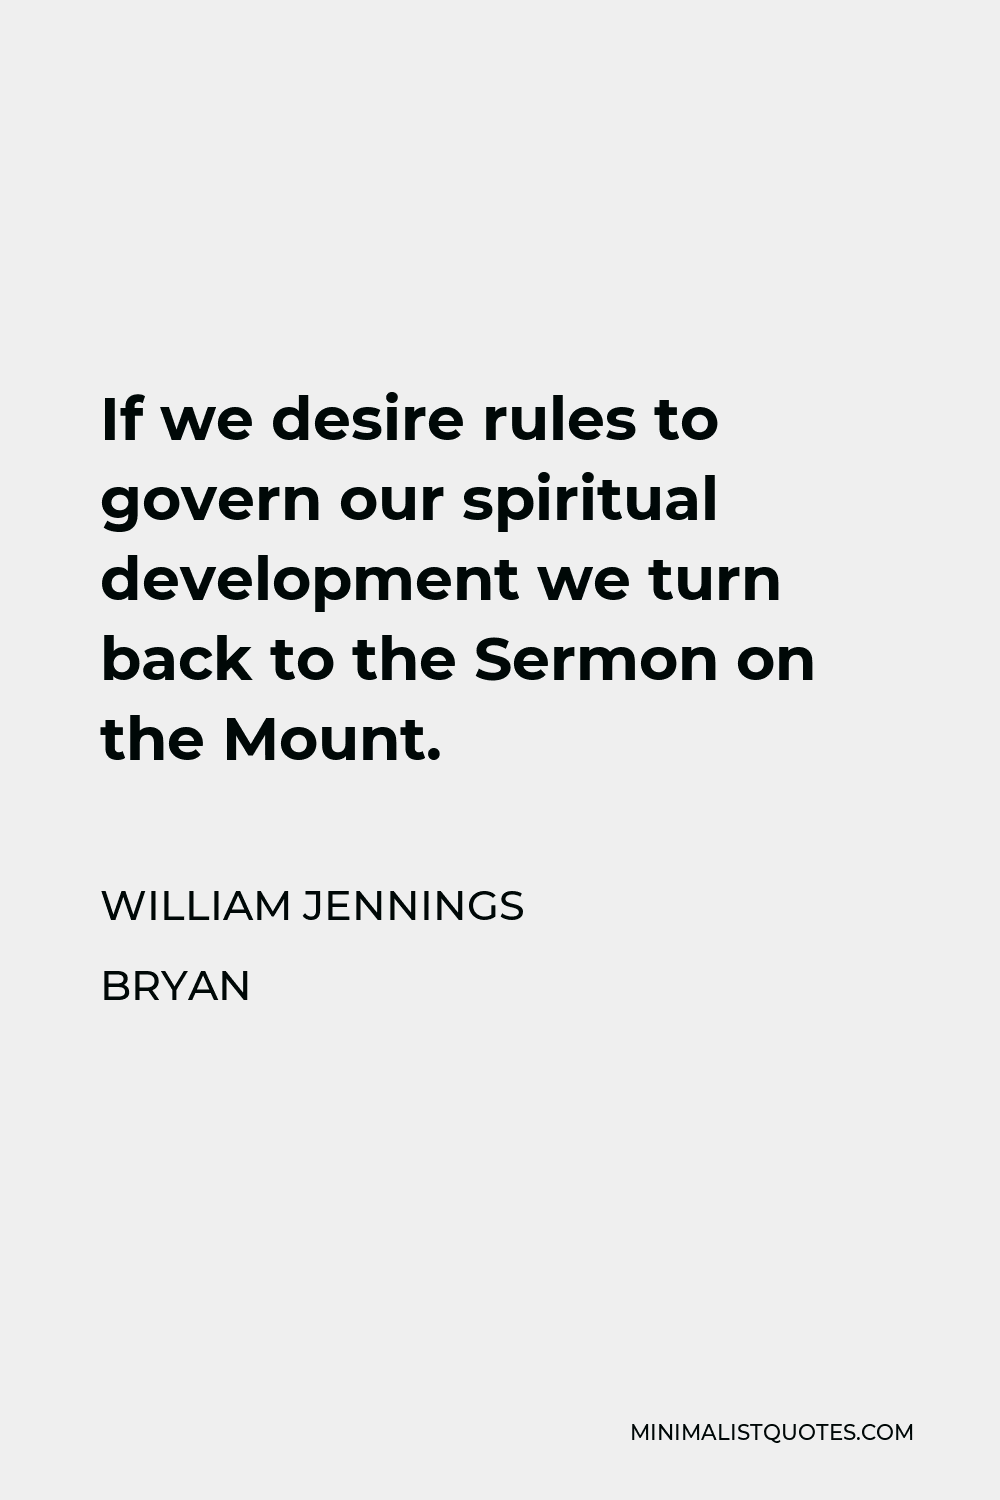 William Jennings Bryan Quote - If we desire rules to govern our spiritual development we turn back to the Sermon on the Mount.